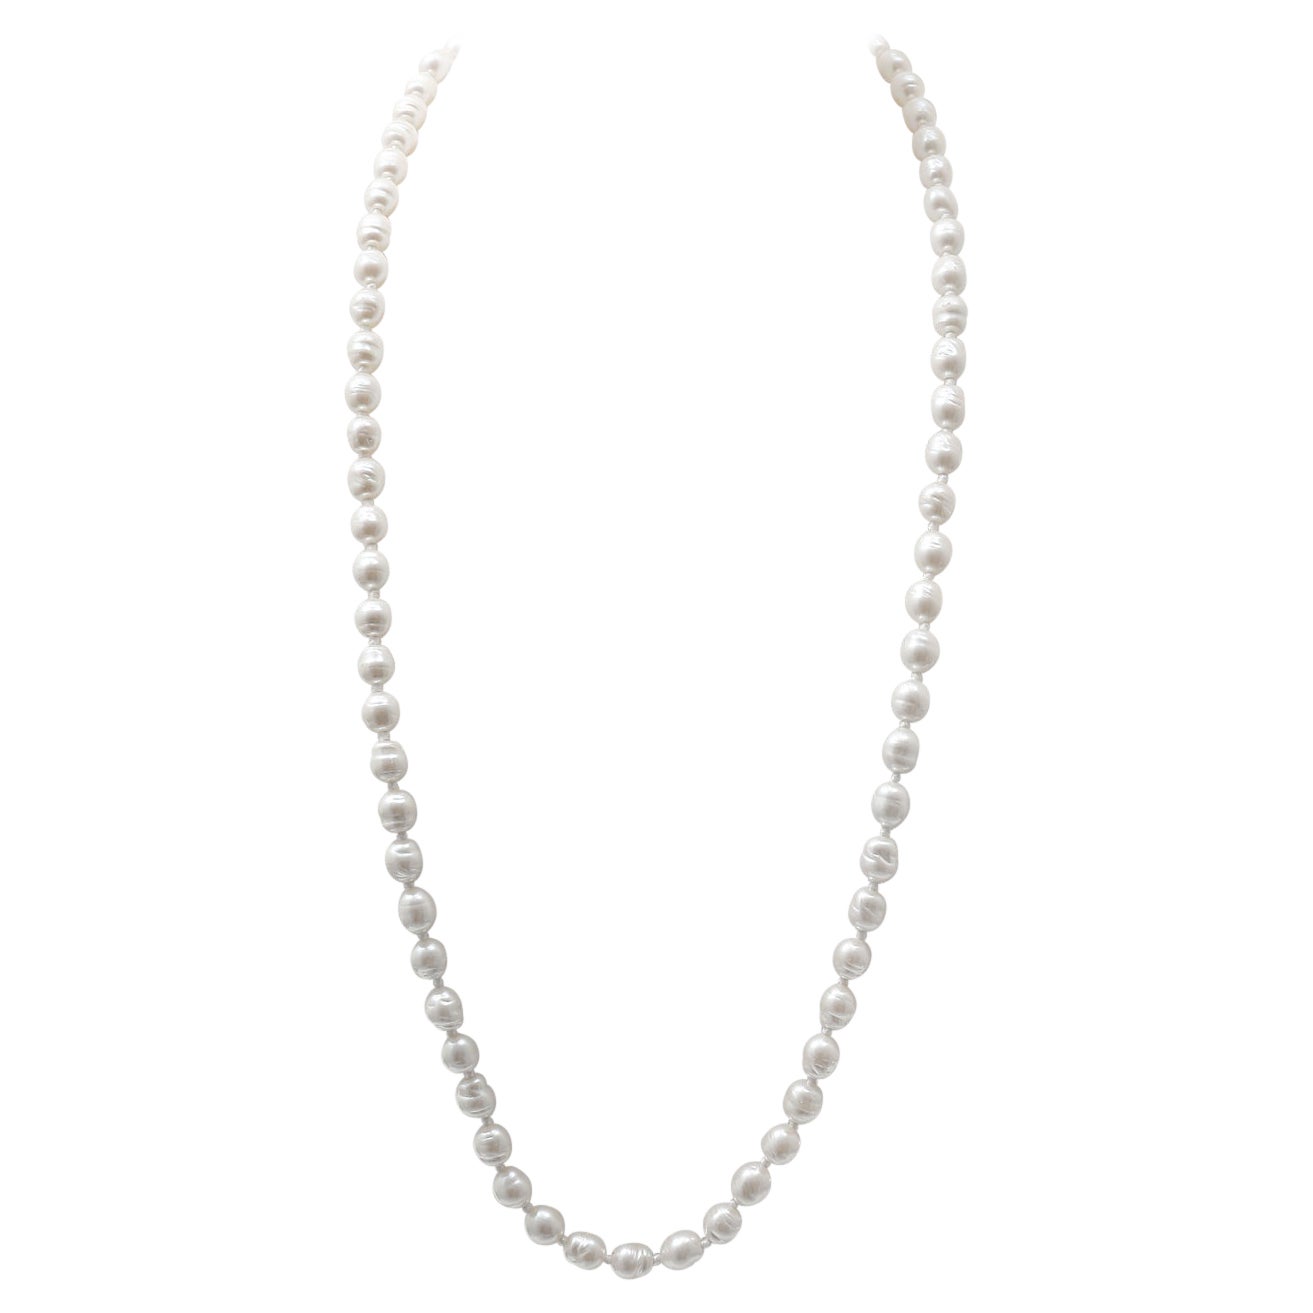 Chanel White Baroque Pearl Necklace